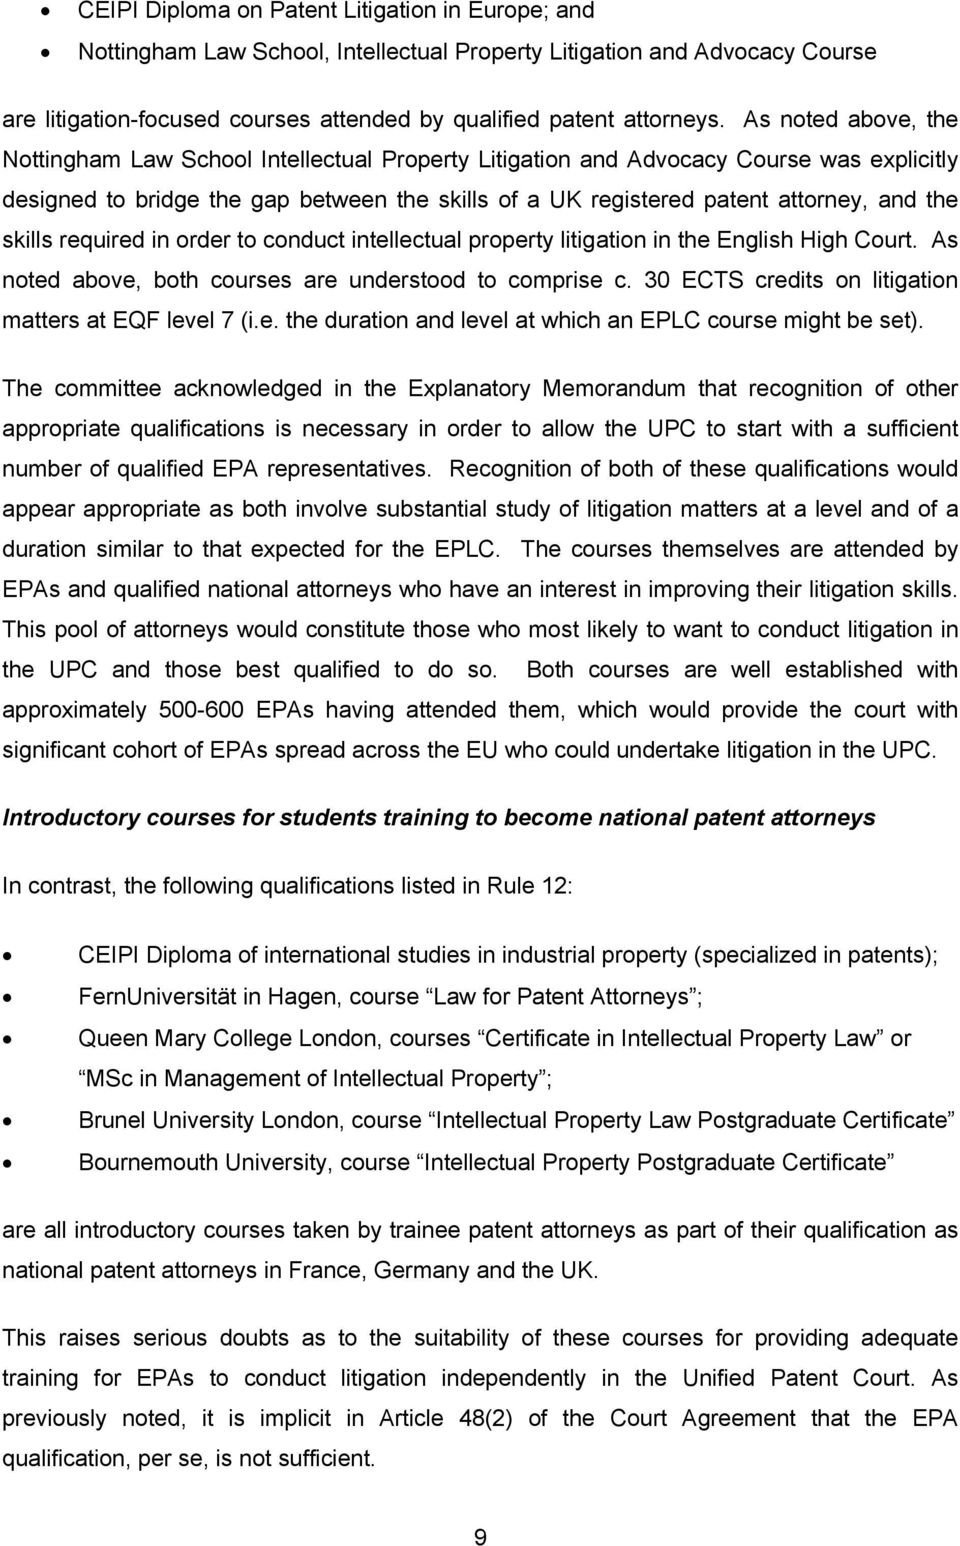 skills required in order to conduct intellectual property litigation in the English High Court. As noted above, both courses are understood to comprise c.